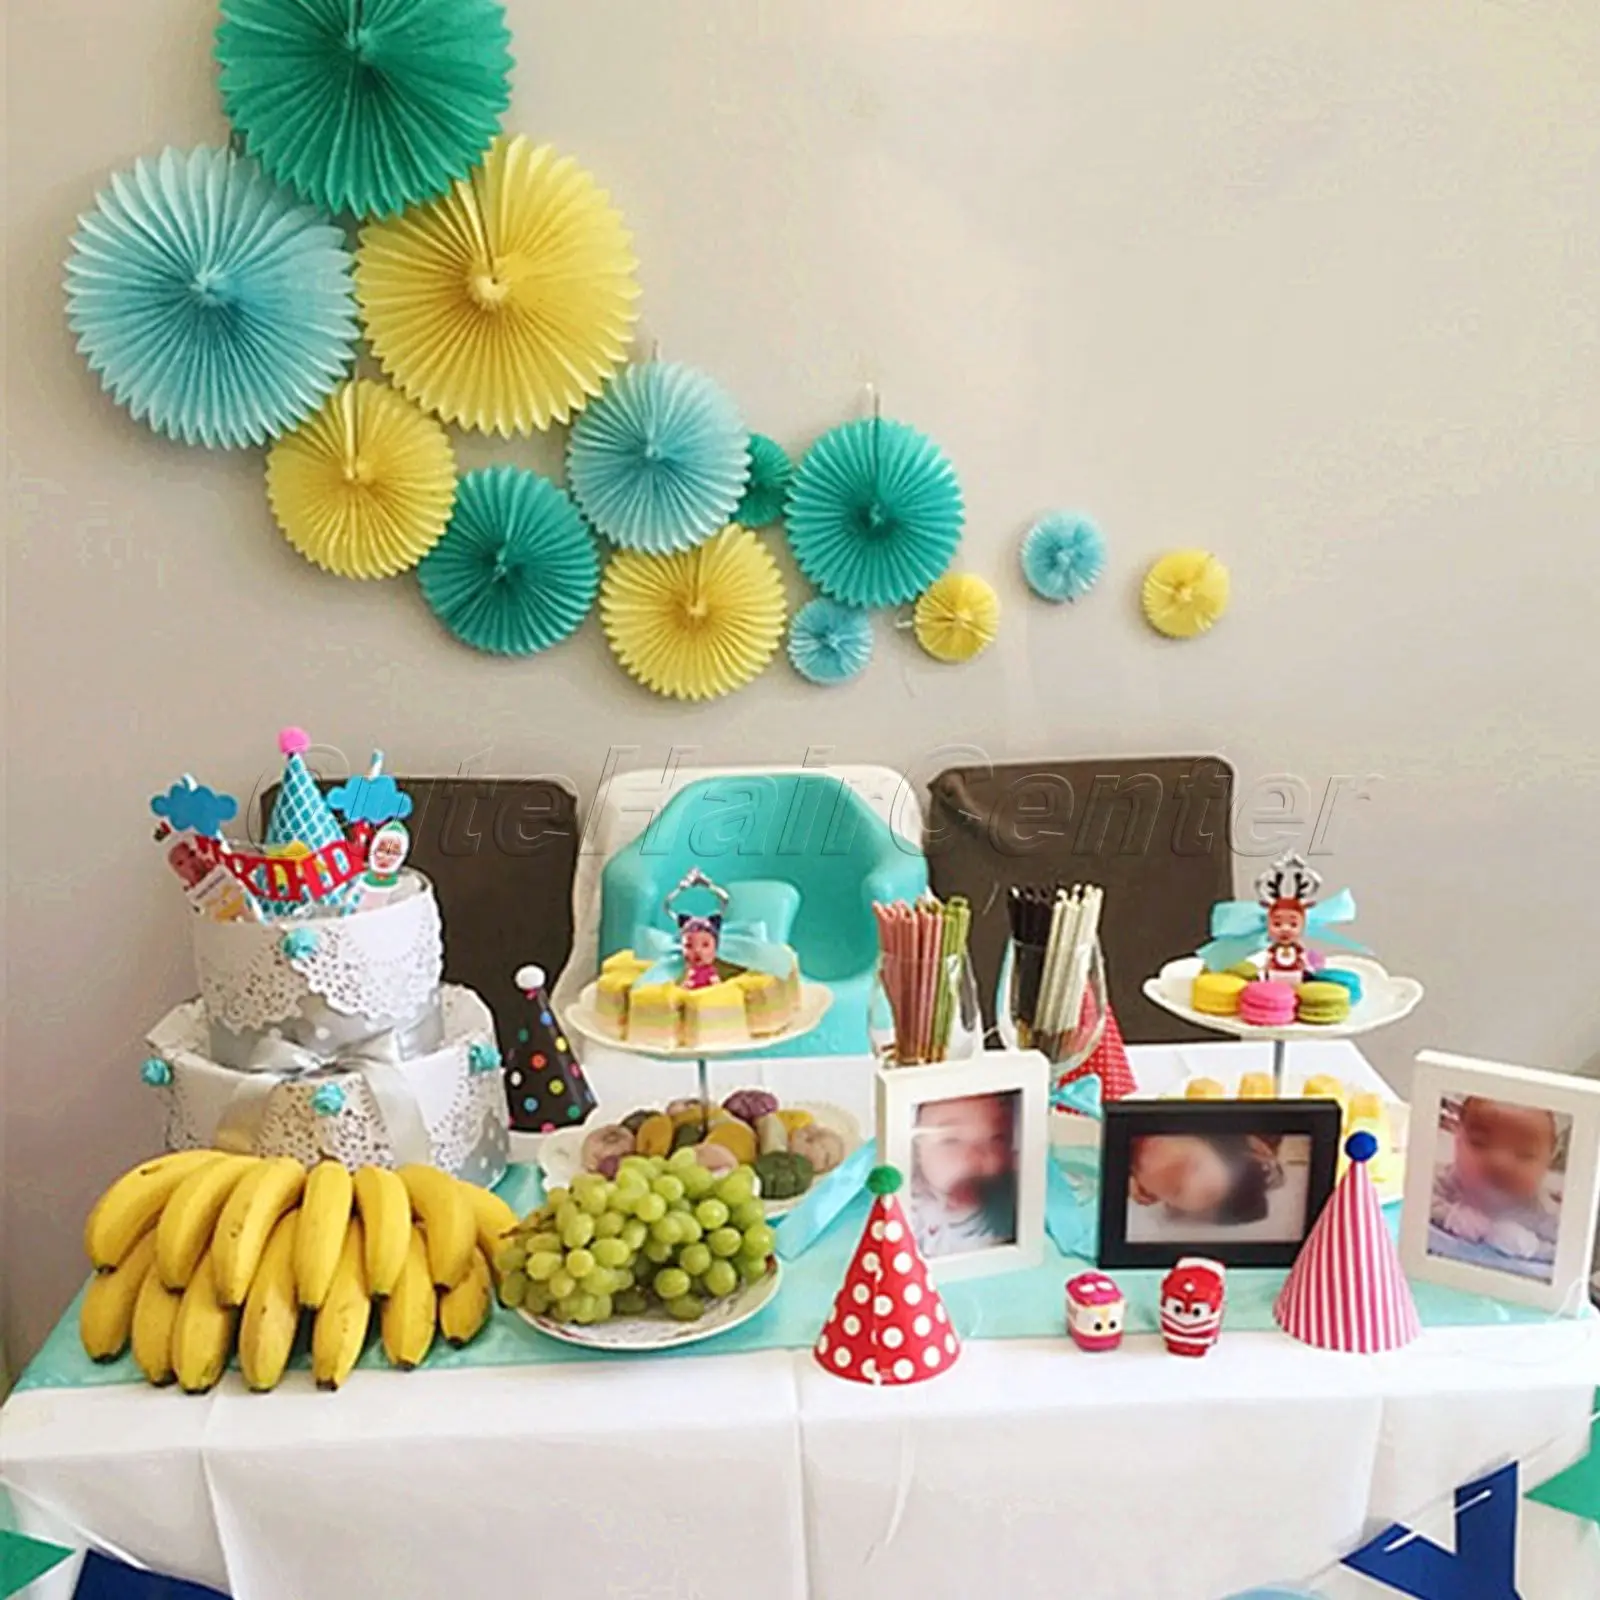 Diy Party Decorations With Paper - 24 Great DIY Party Decorations